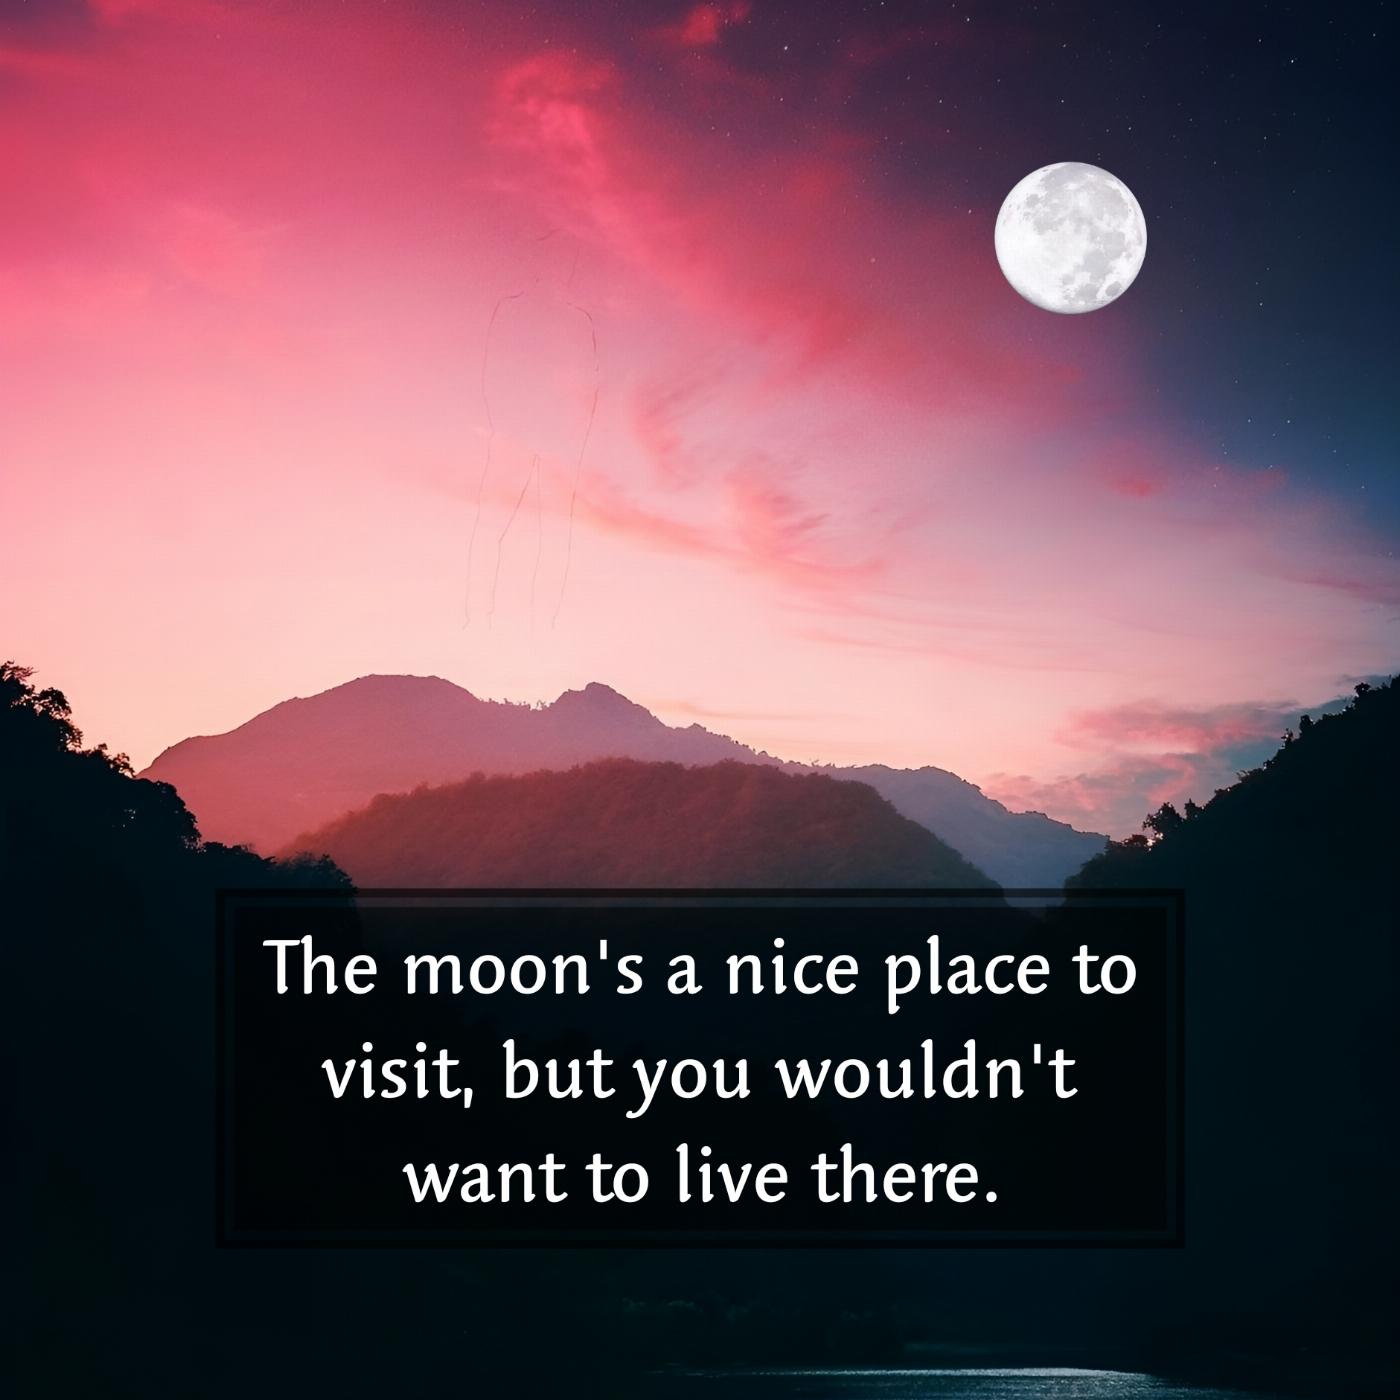 The moon's a nice place to visit